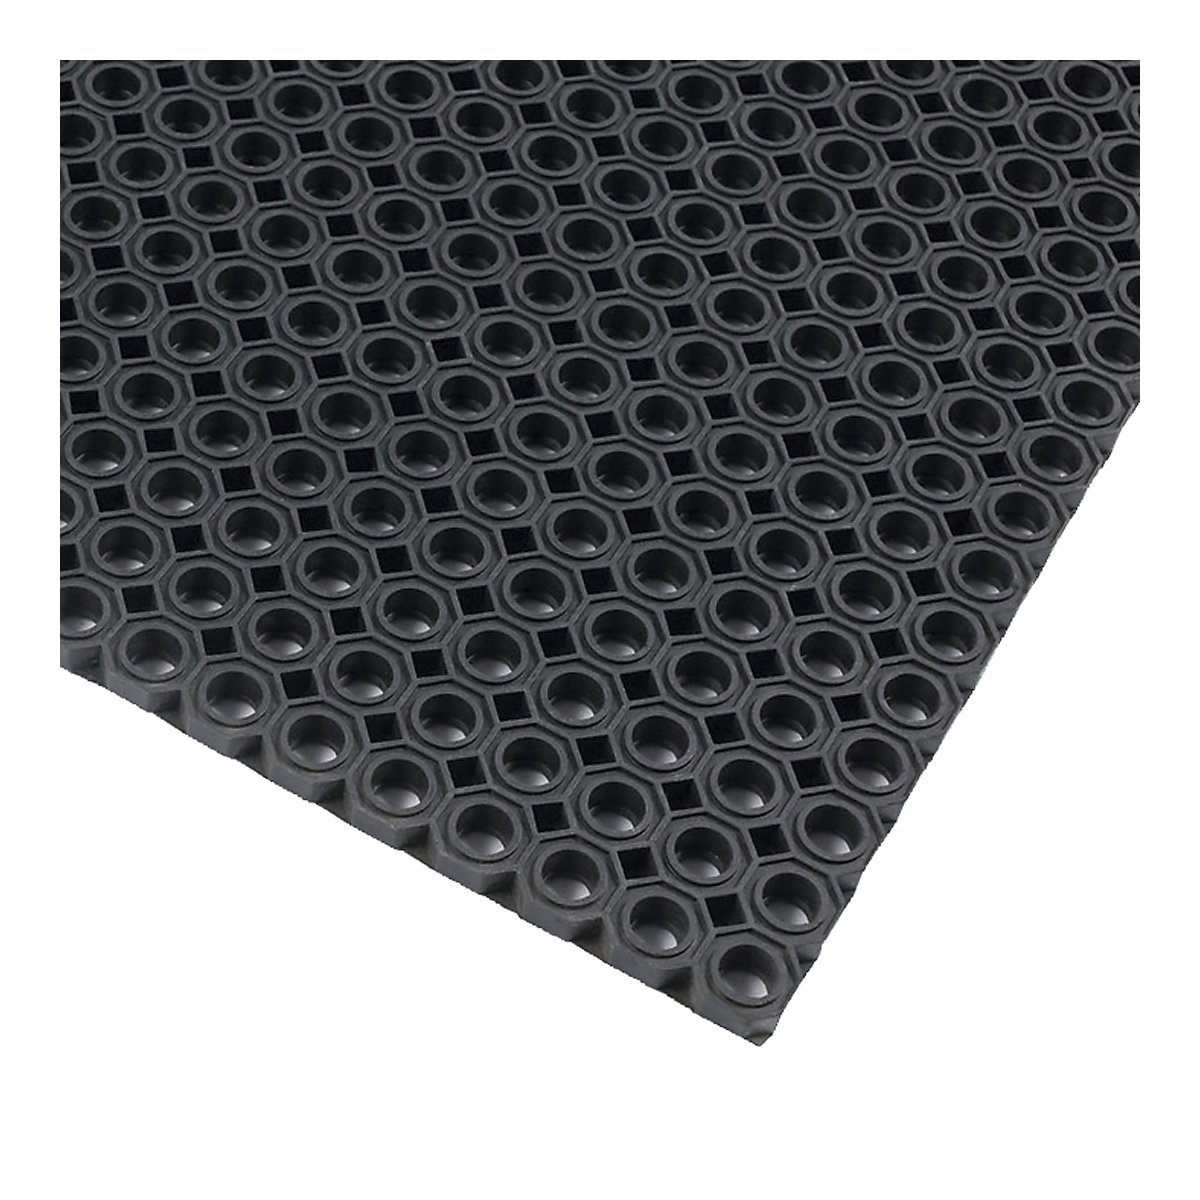 Entrance matting, perforated - NOTRAX